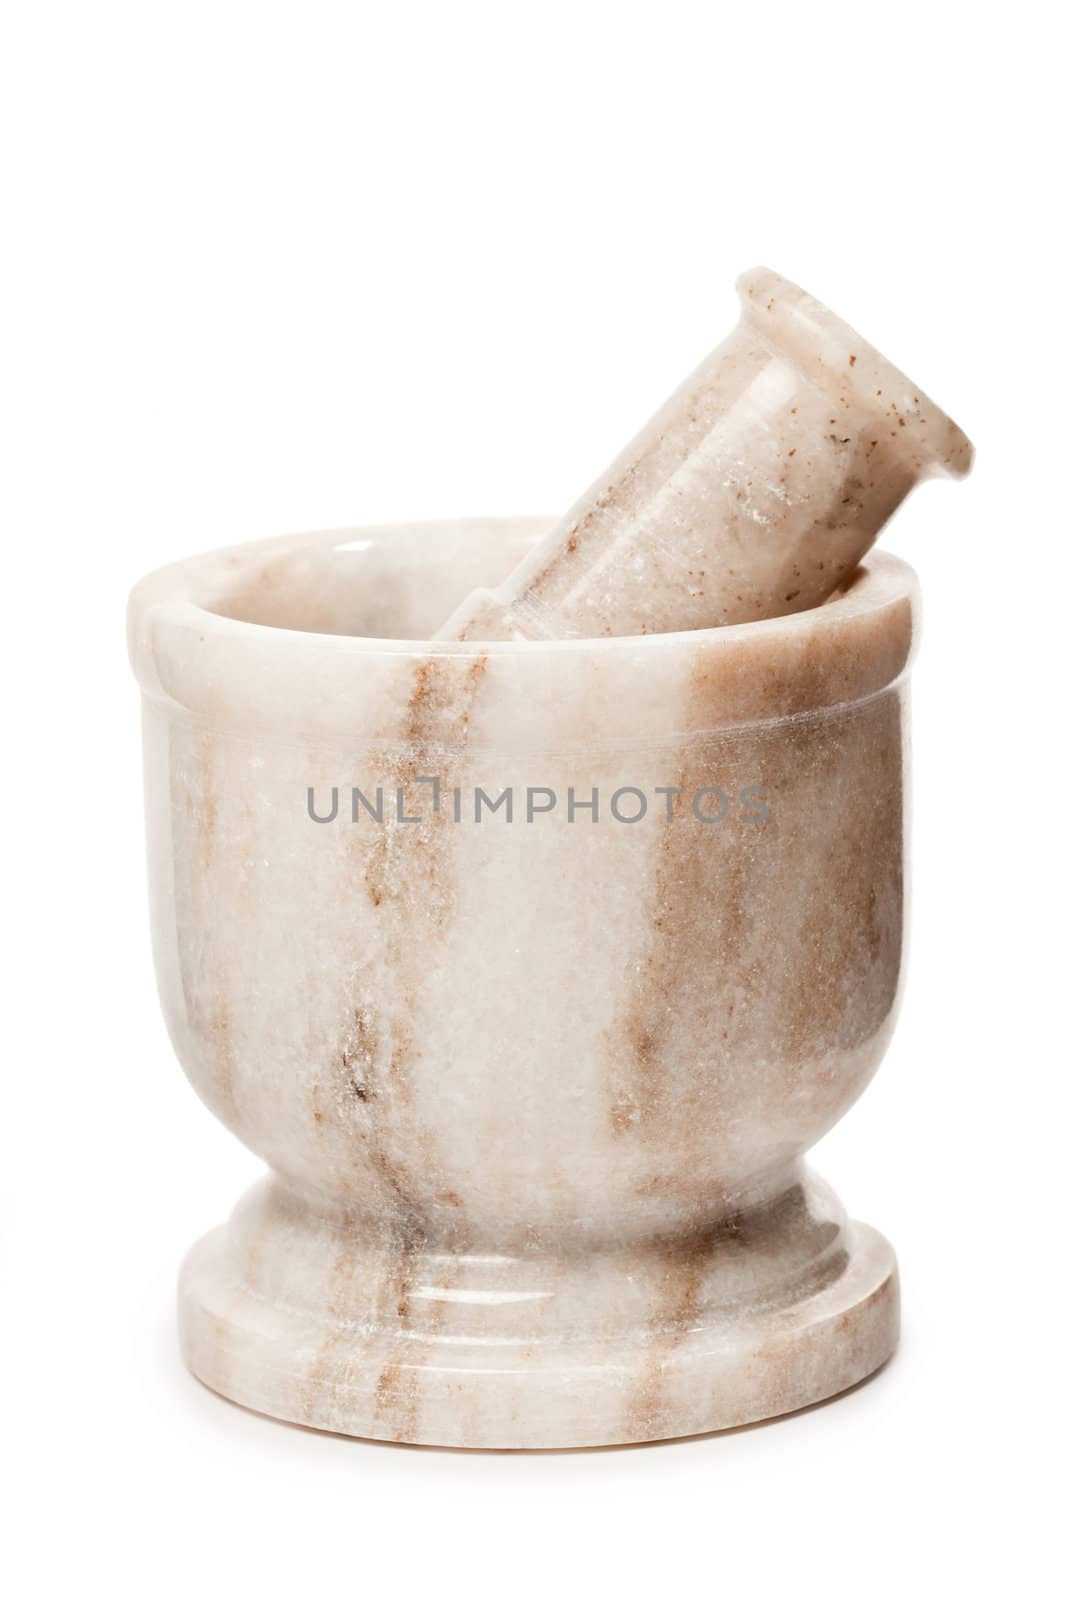 Marble mortar and pestle on white by dimol